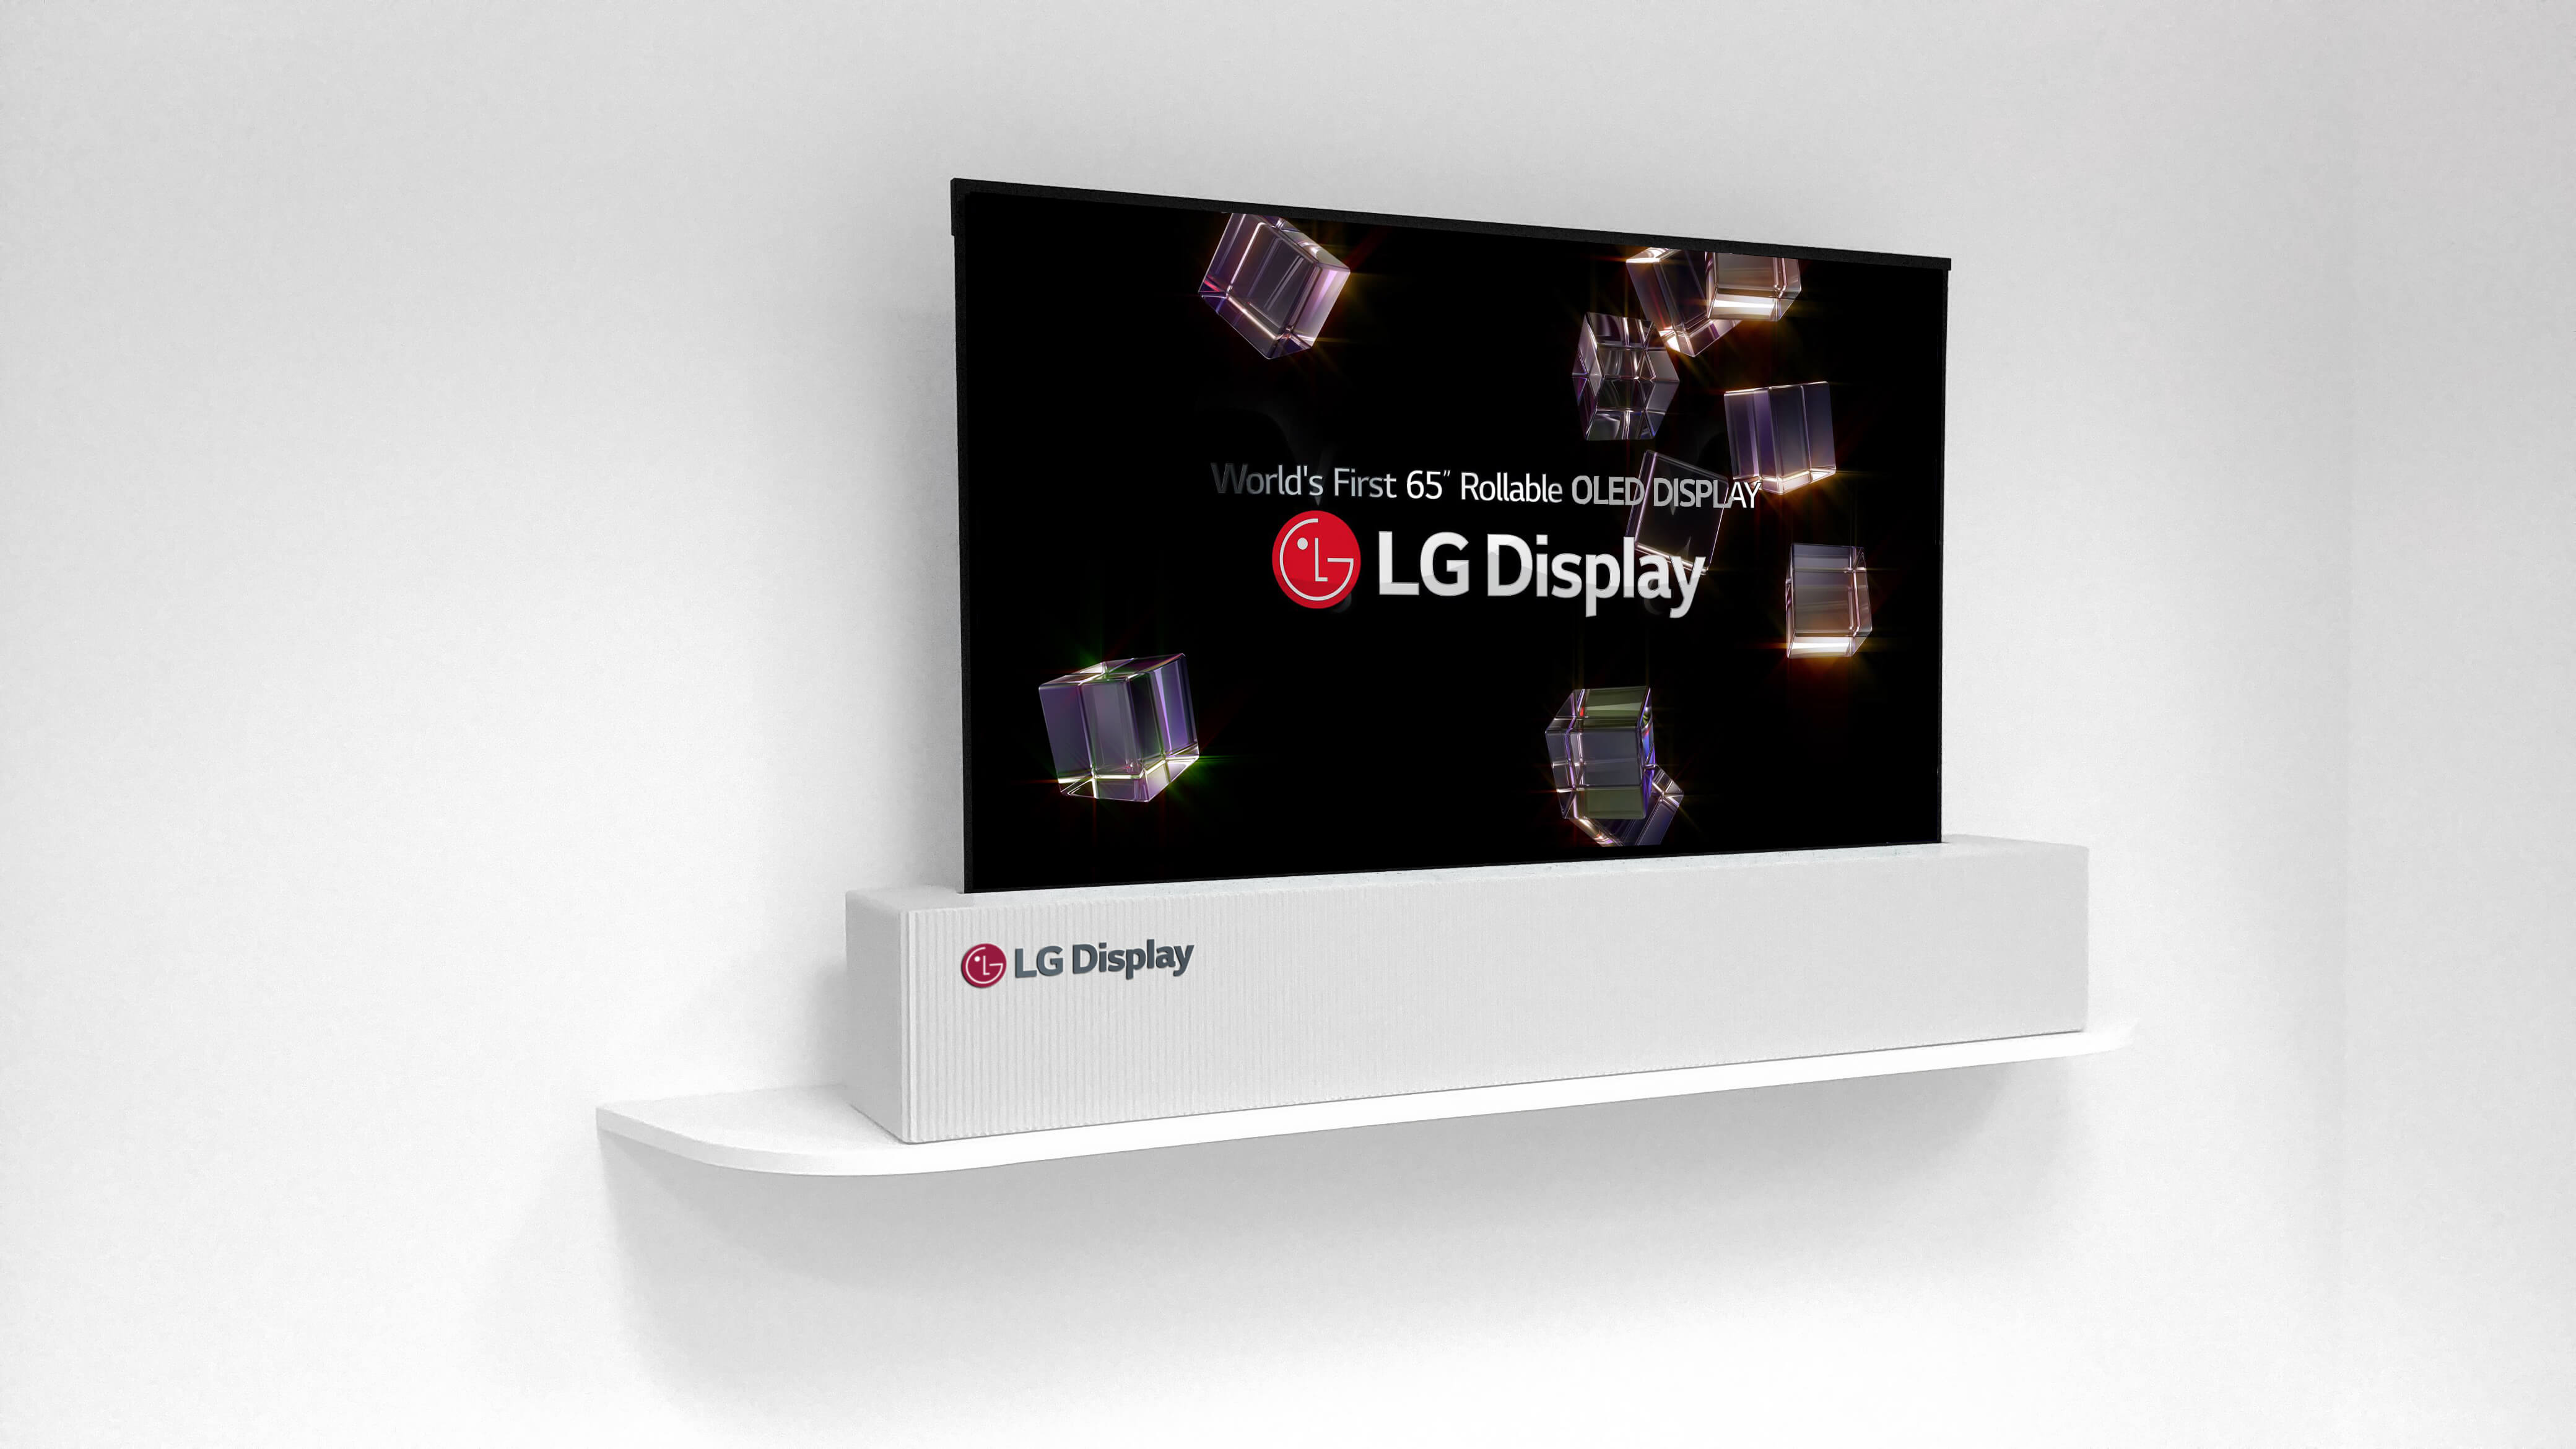 LG to launch a 65-inch rollable OLED TV in 2019